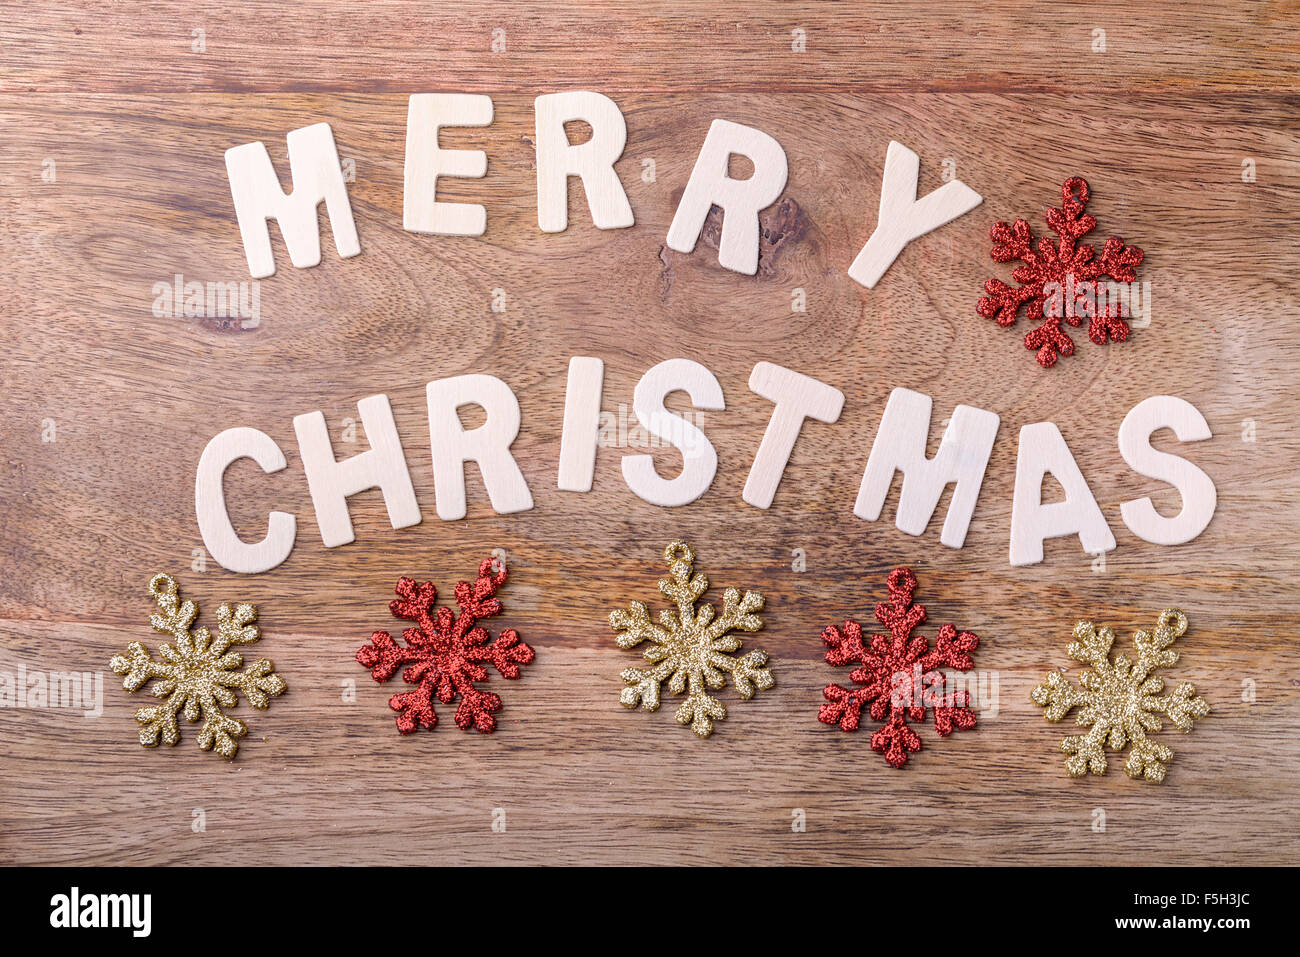 merry christmas made with wooden letters on wood with gold and red snowflake decorations Stock Photo